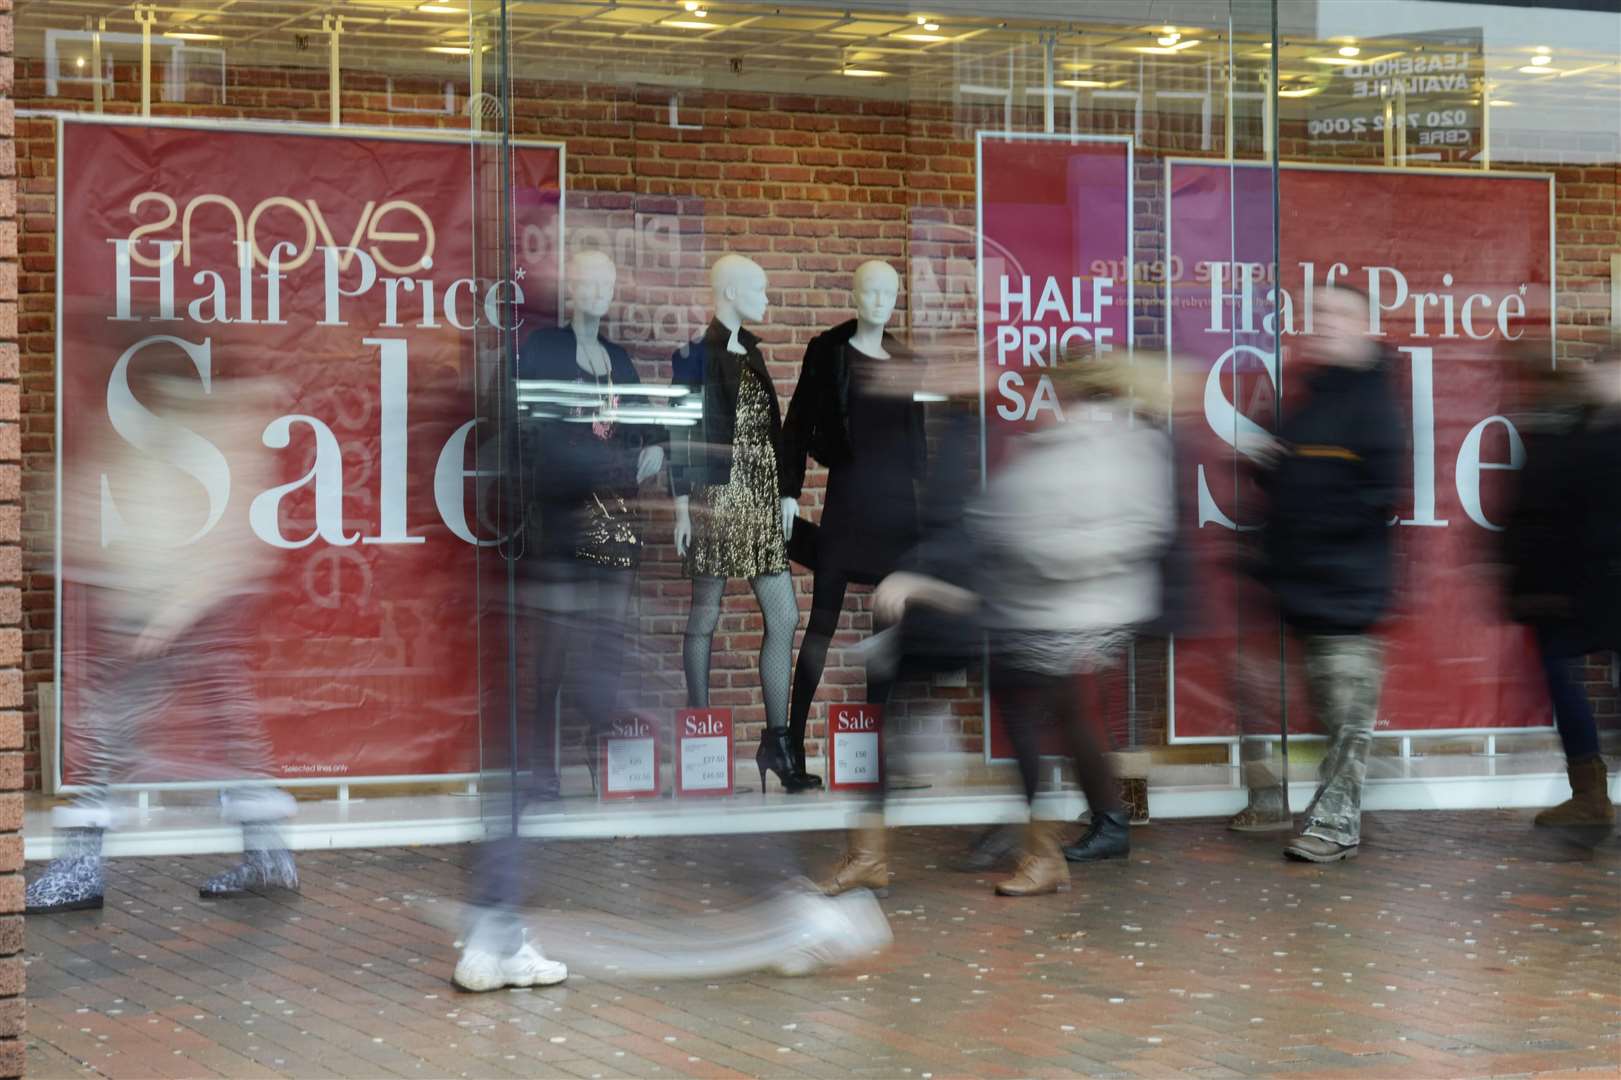 The Chatham branch - Debenhams saw disappointing sales in the run-up to Christmas